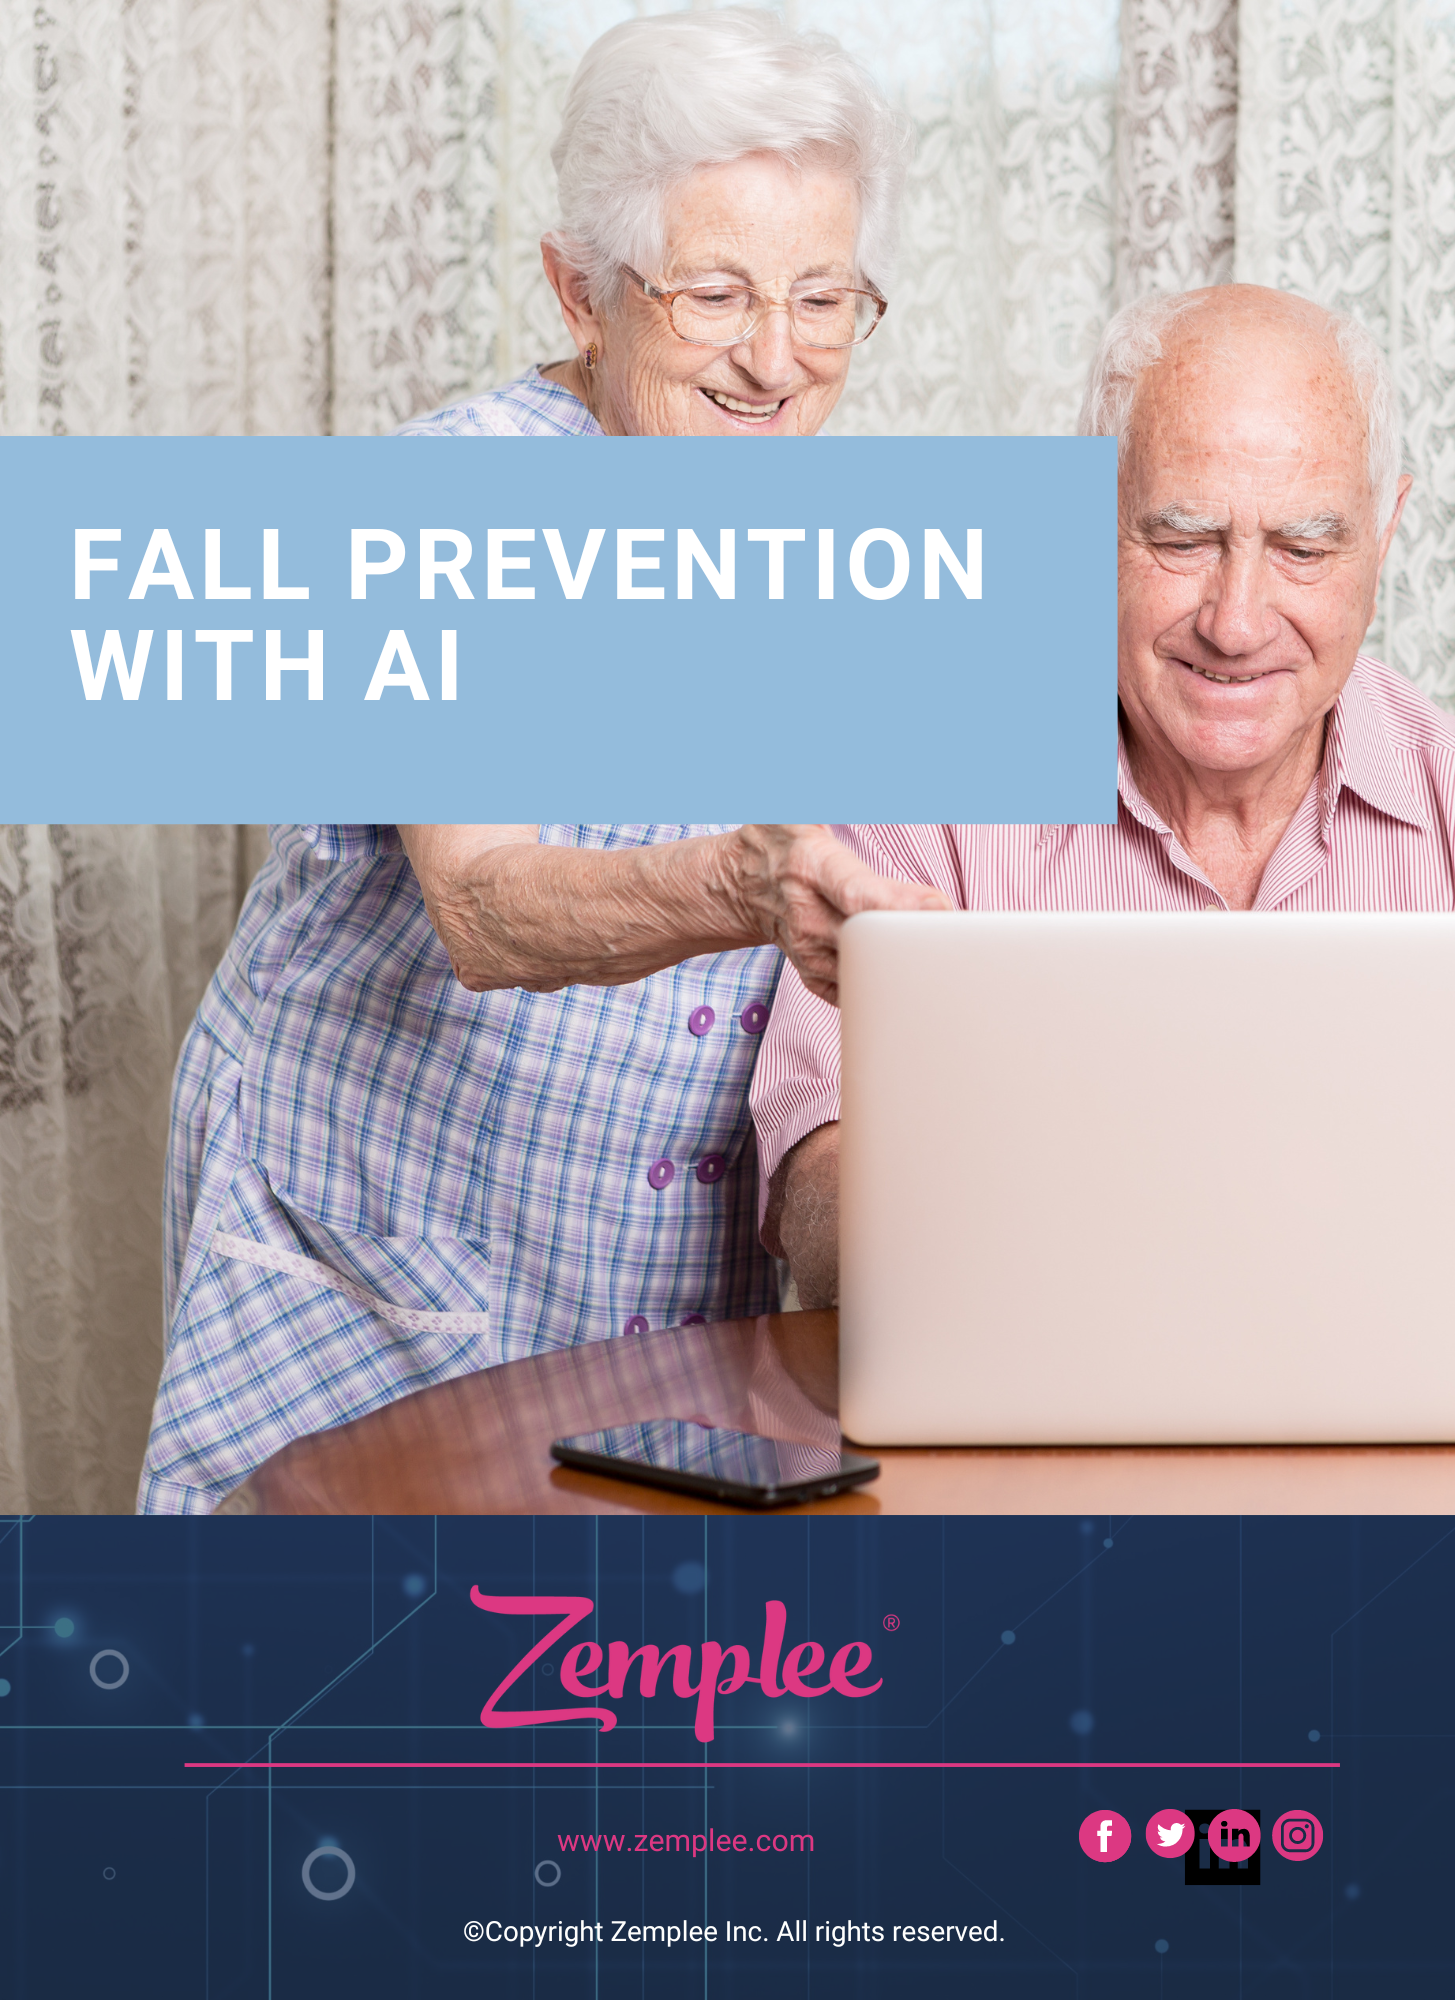 Zemplee Whitepaper - AI for Fall Prevention with Amazon Alexa